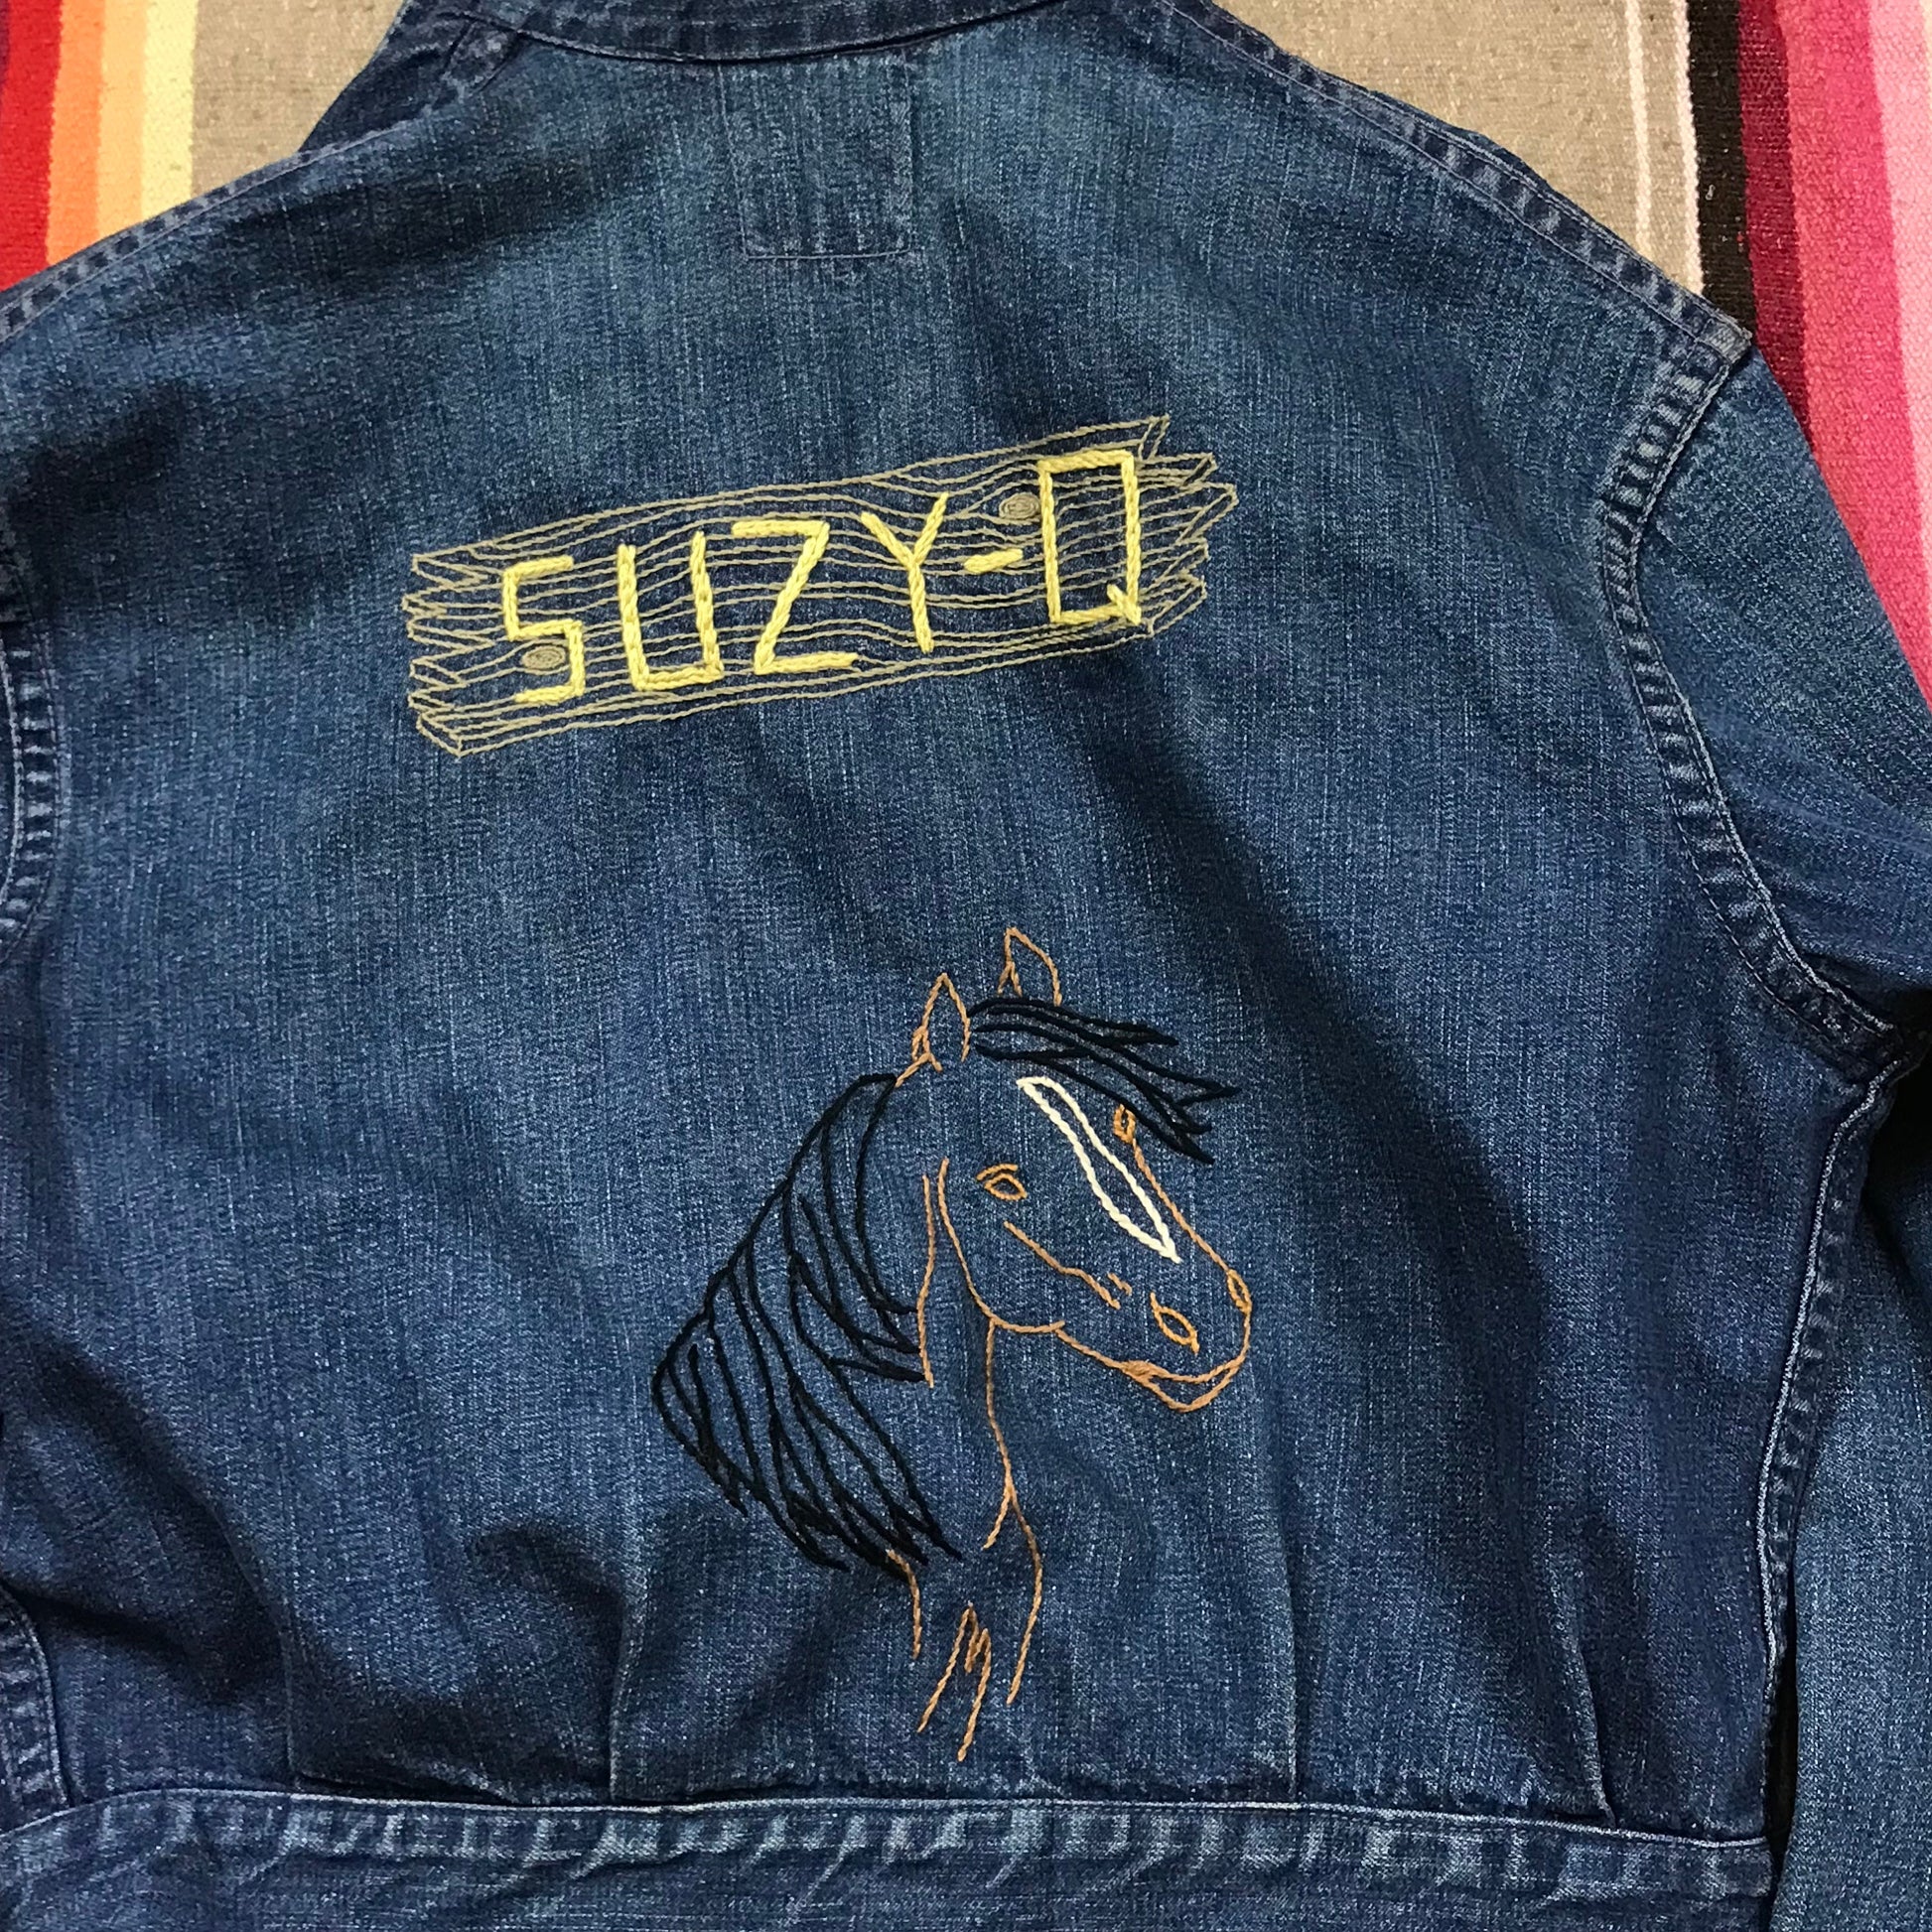 1950s Levi's Shorthorn Denim Ranch Jacket Embroidered "Vicky" Suzy Q Horse Made in USA Womens Size XS/S